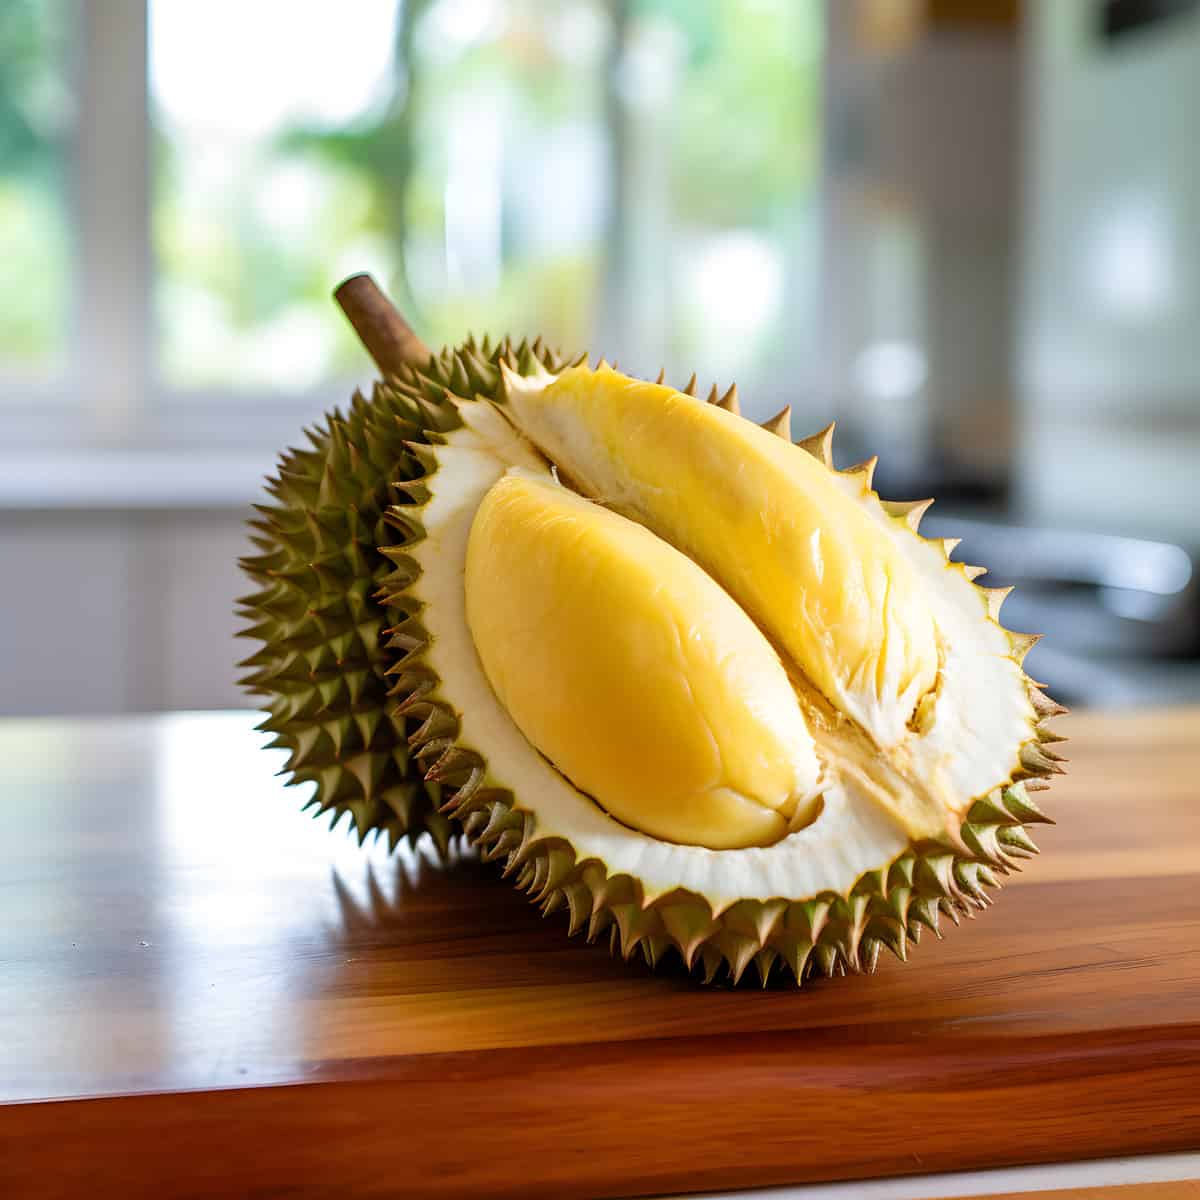 Durian Fruit on a kitchen counter